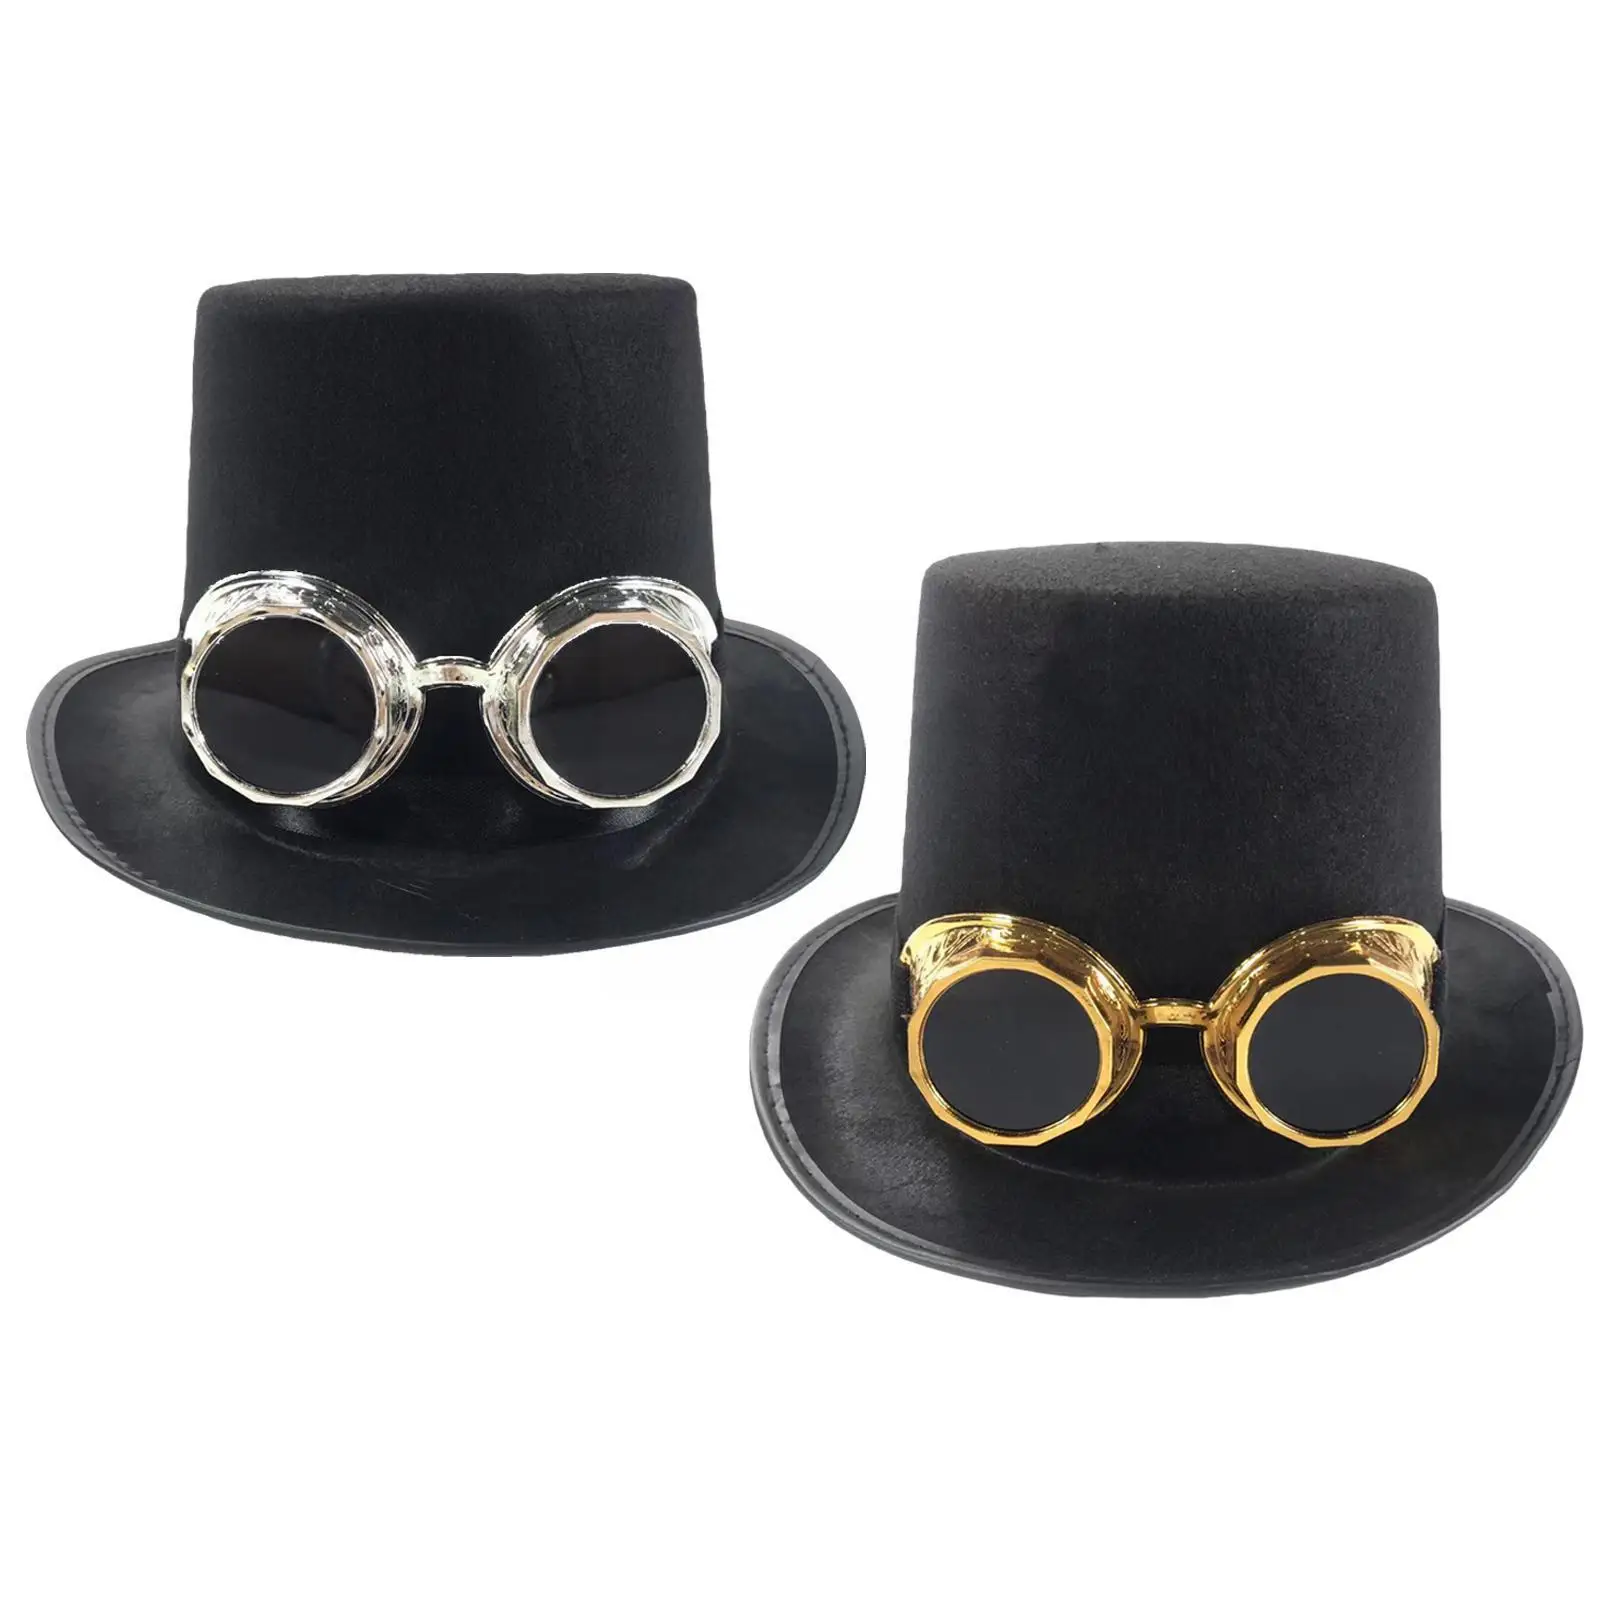 

Gothic Black Hat With Detachable Steampunk Goggles Fedora Hats For Men Carnival Halloween Jazz Masquerade Party Costume Q3z8